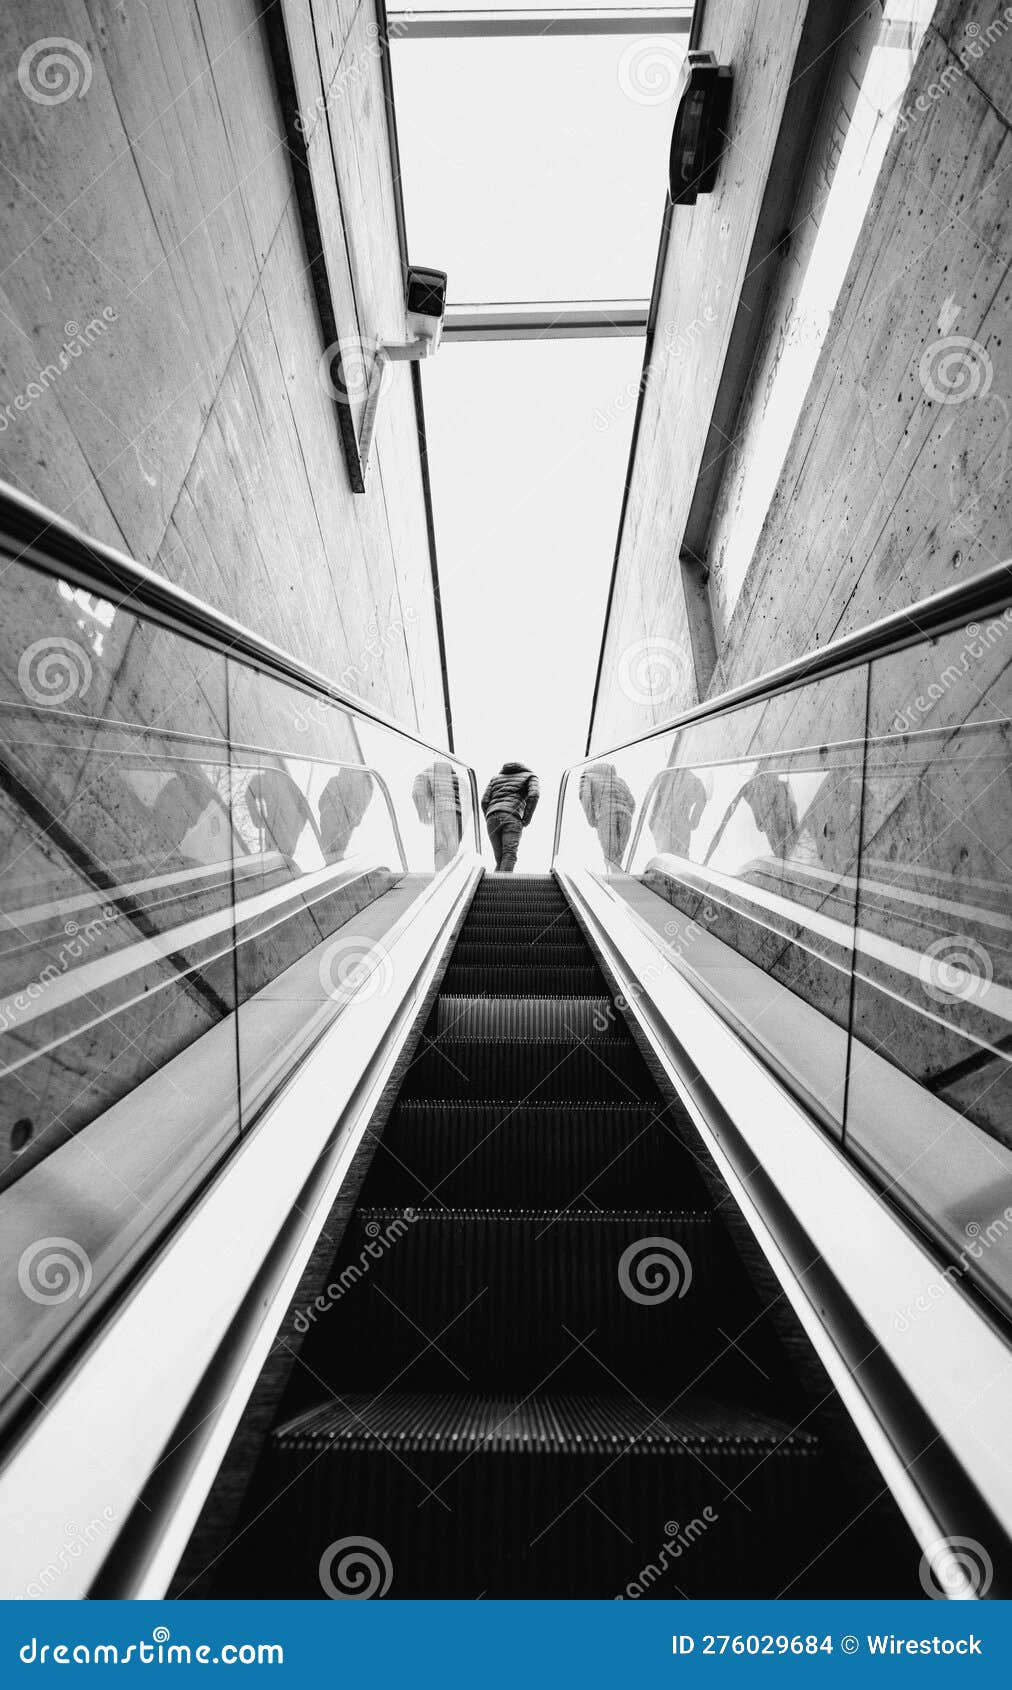 low angle shot of a man stepping off a grey metal escalator in a modern building